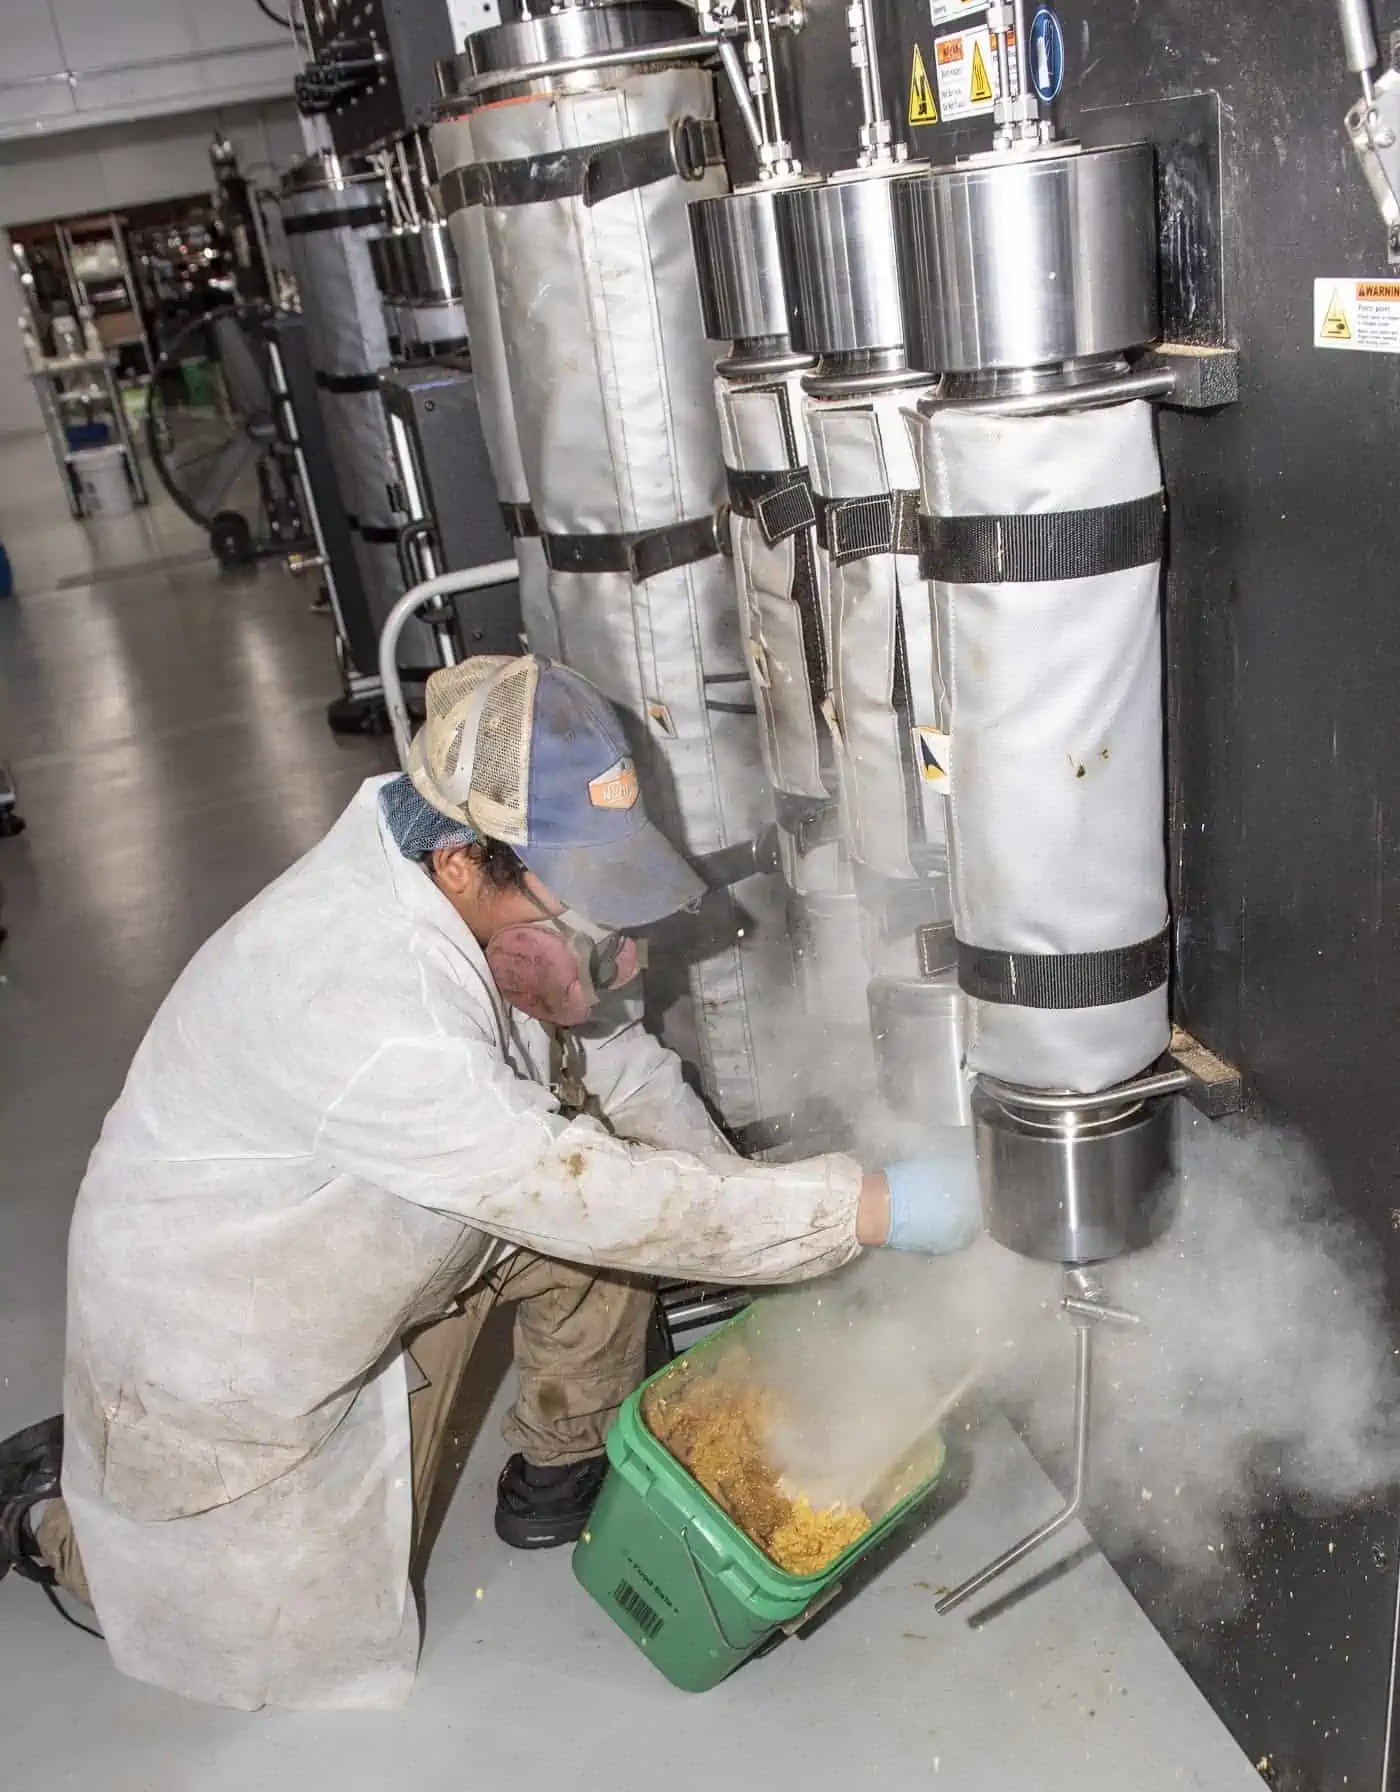 supercritical CO2 extractor being used